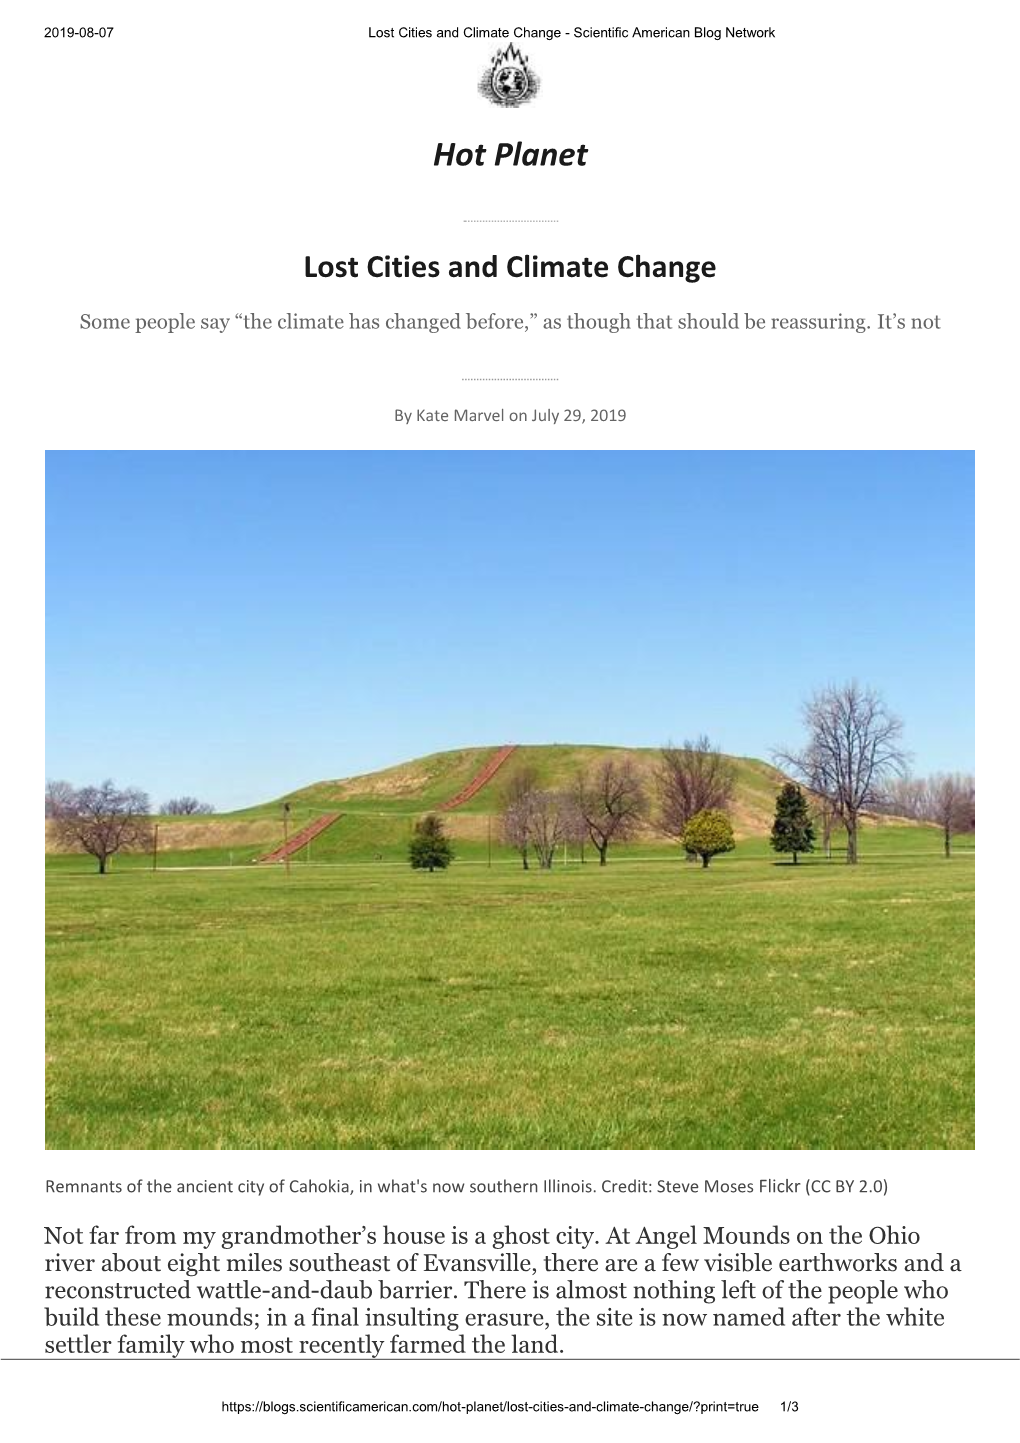 Lost Cities and Climate Change - Scientific American Blog Network